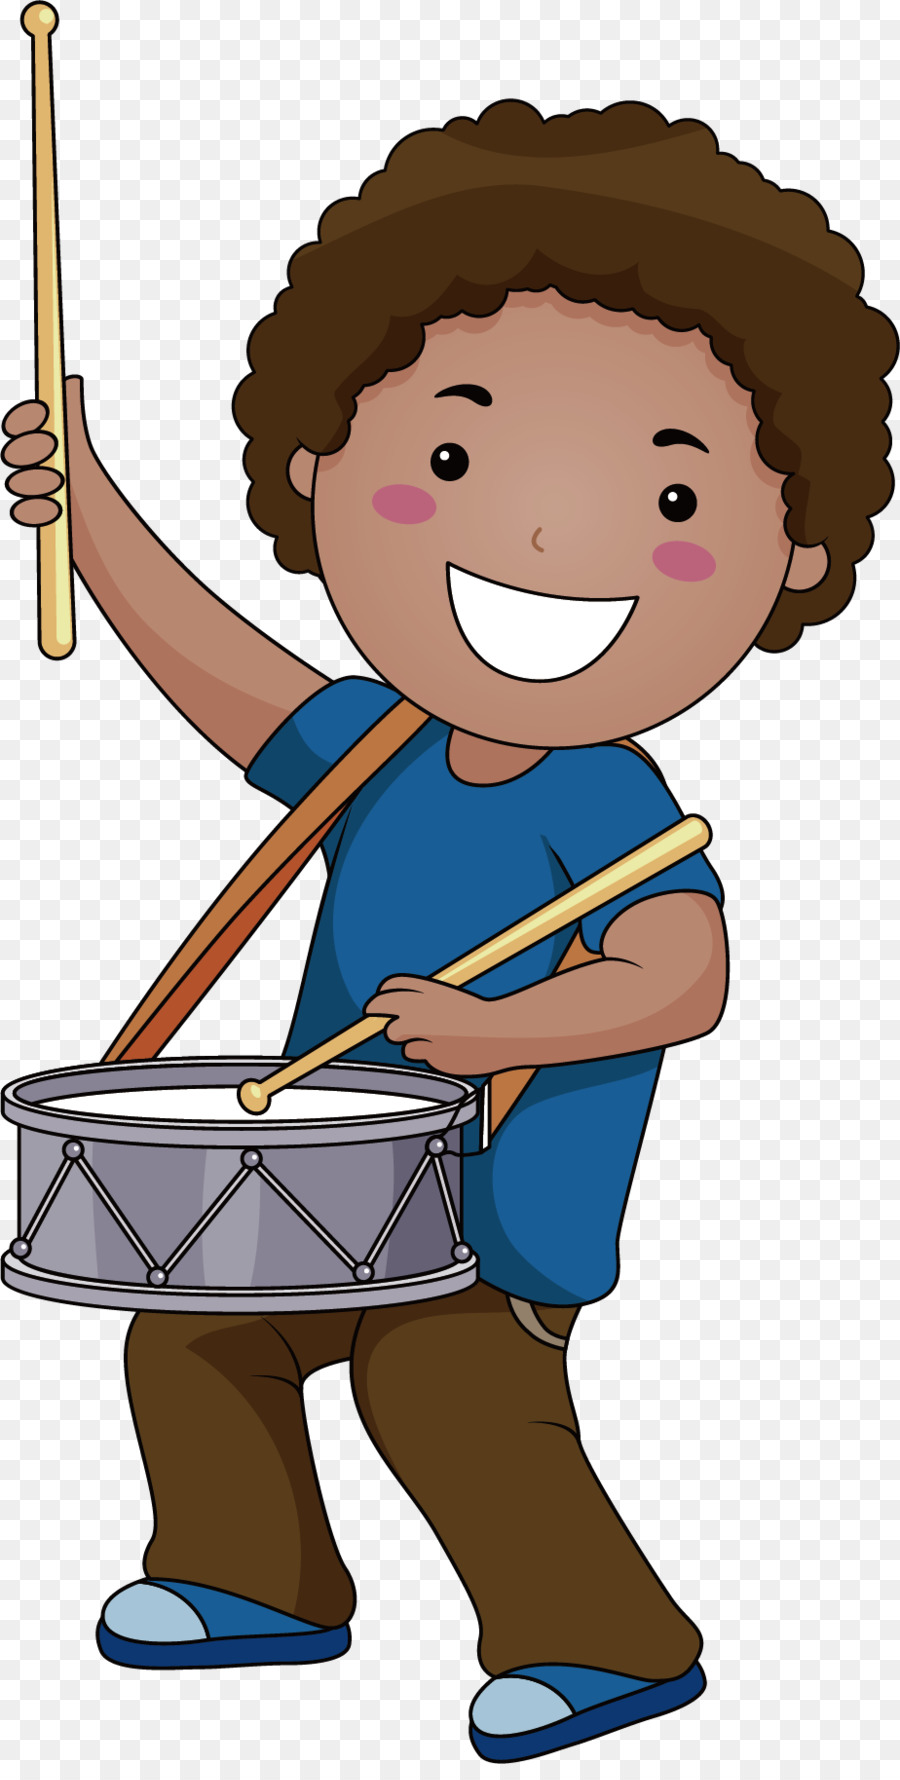 Musical instrument Drawing Clip art - Drum boy boy cartoon poster promotional material png download - 924*1811 - Free Transparent  png Download.